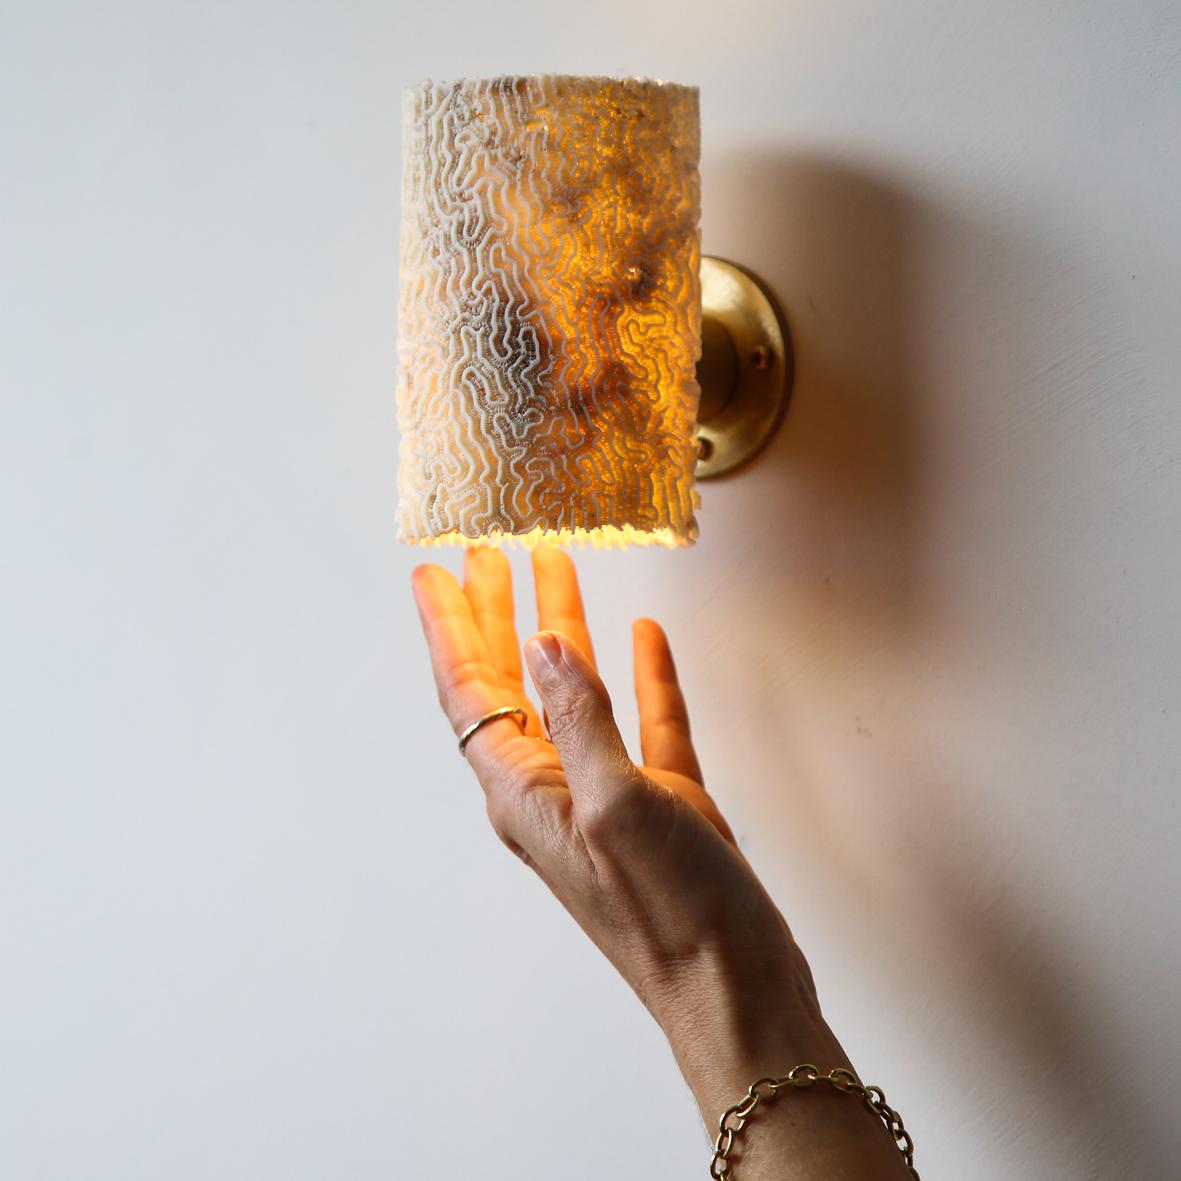 This Fossil Coral Brain Dome Wall Sconce (Medium) is a captivating fusion of nature's wonders and stunning craftsmanship, destined to bring a unique aesthetic warmth and etherial glow to your space. Ethically sourced and delicately handcrafted by